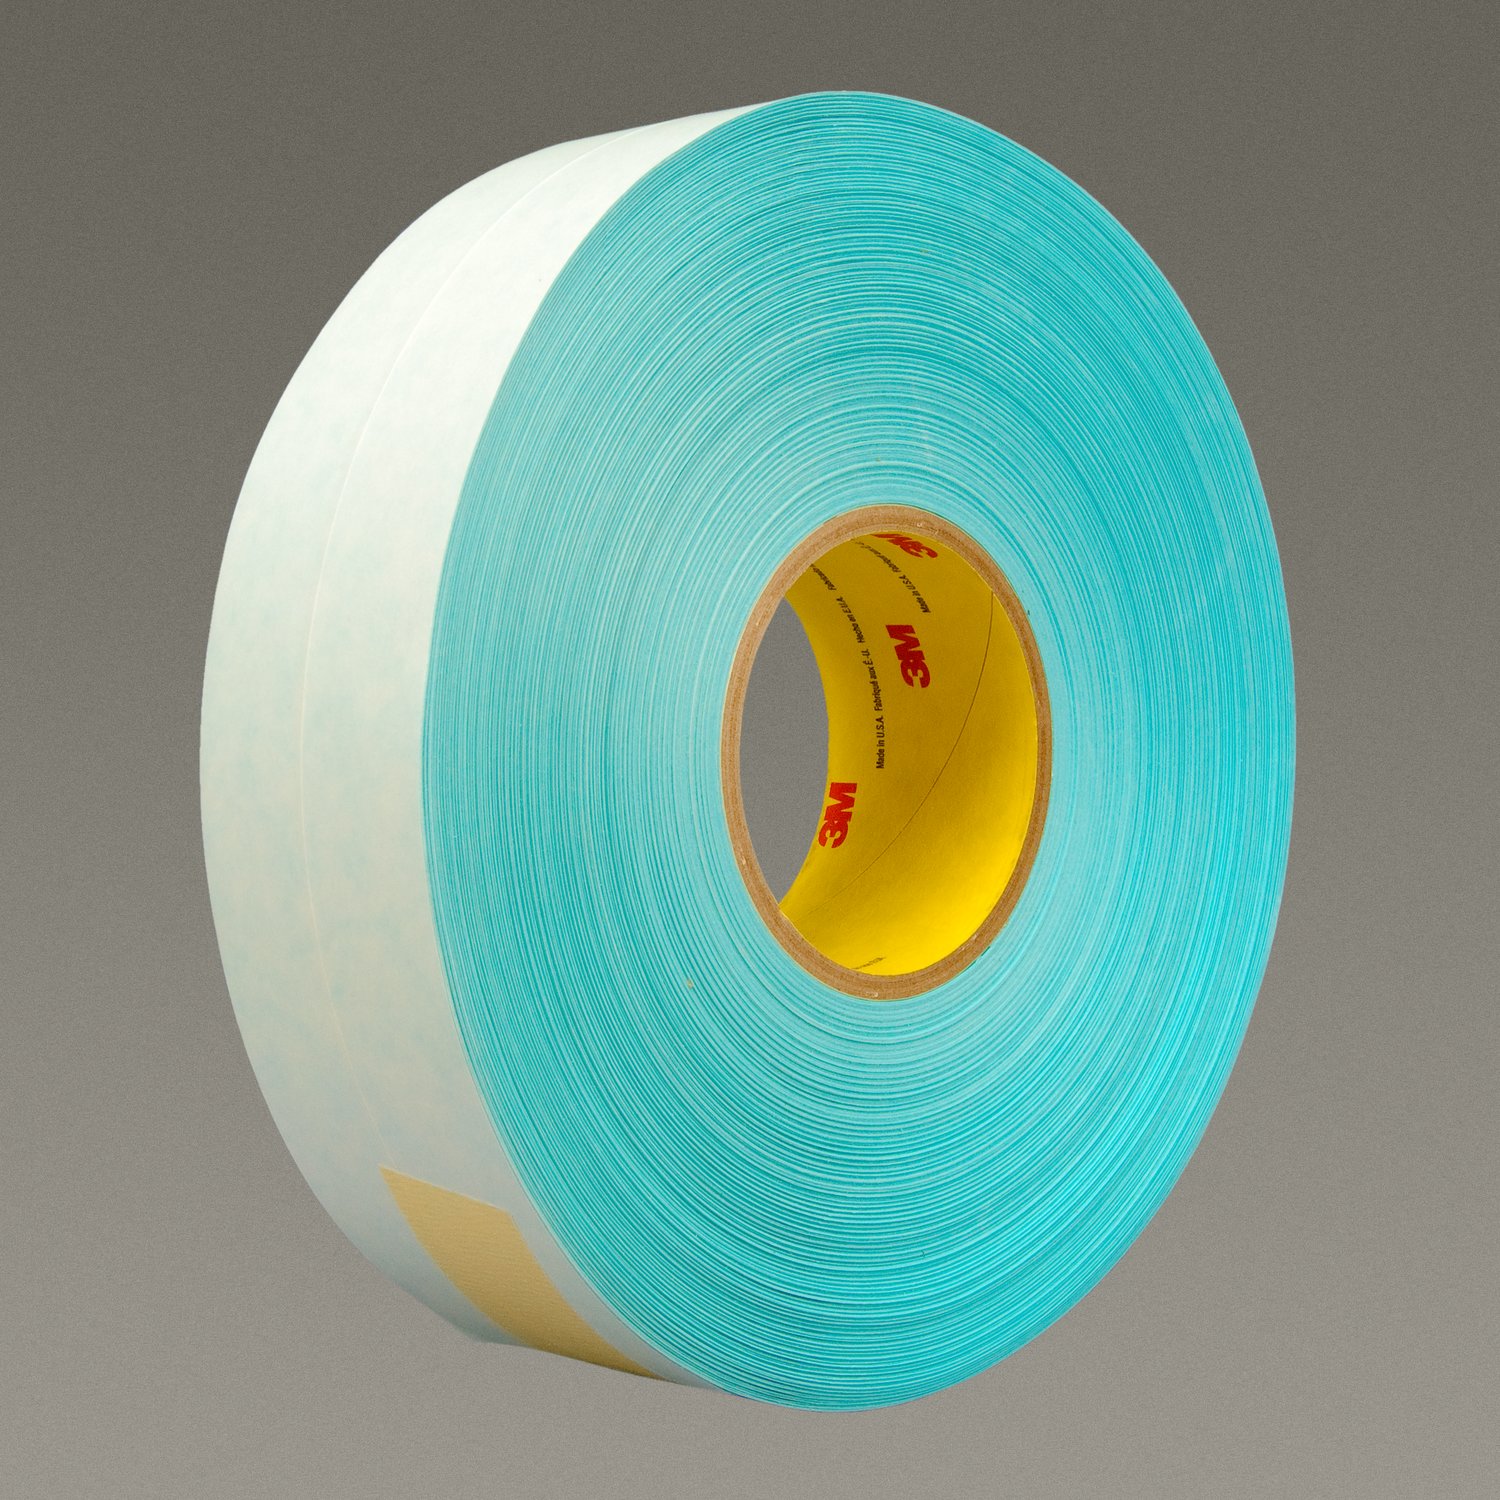 7100027681 - 3M Printable Repulpable Single Coated Splicing Tape 9103, Blue, 36 mm x
55 m, 4.1 mil, 24 rolls per case